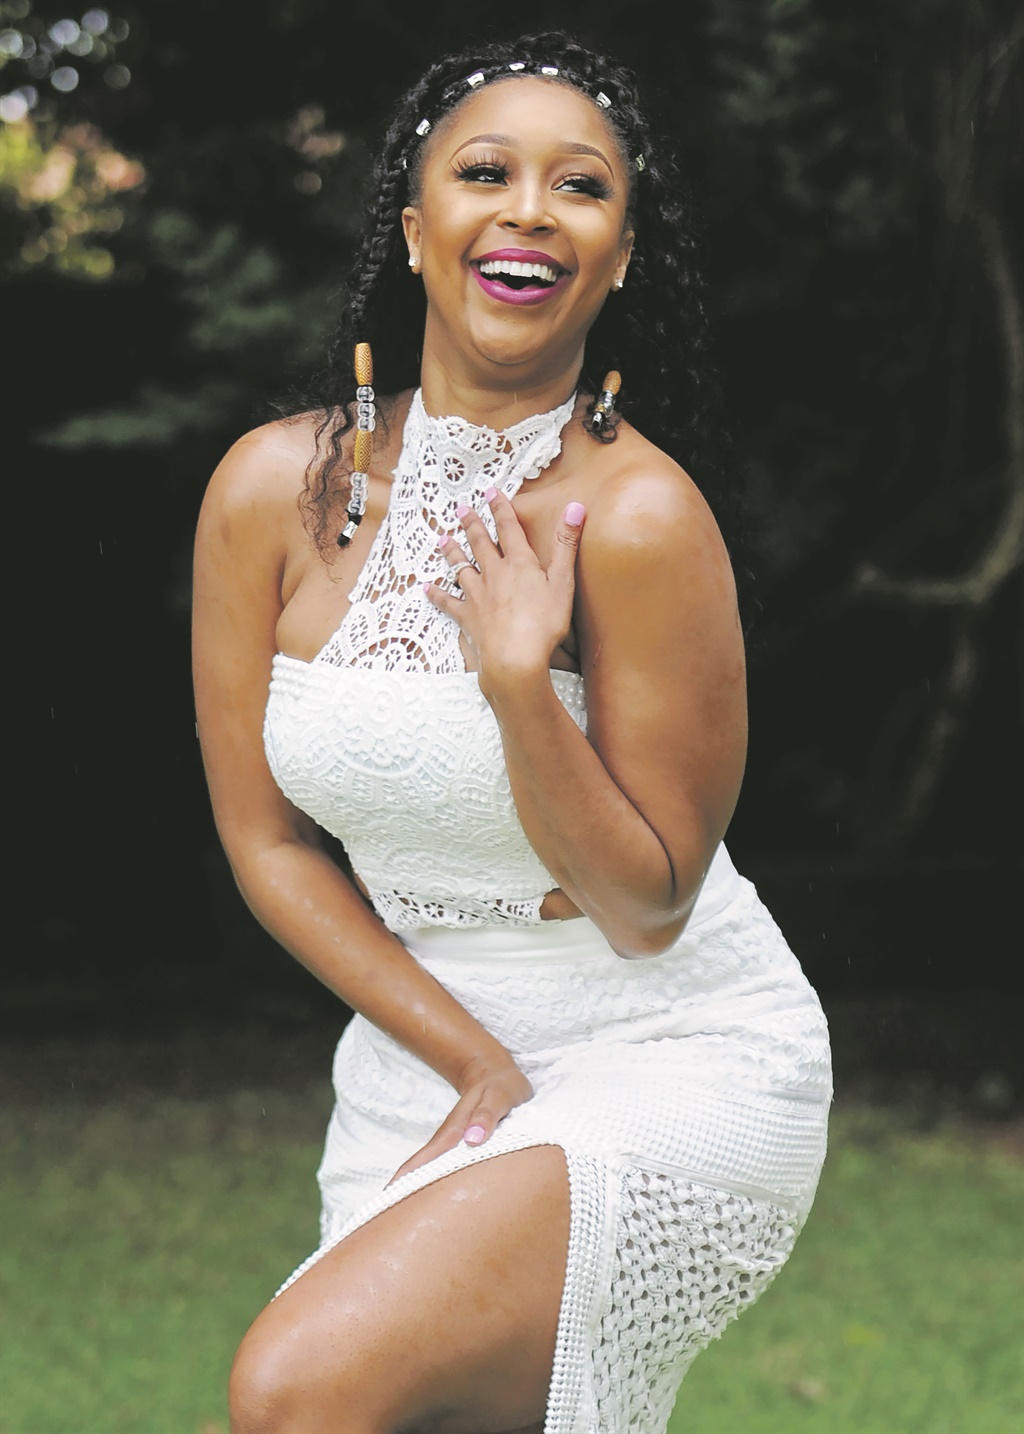 Sassy Minnie Dlamini Jones says life is about learning. Picture: Rosetta Msimango